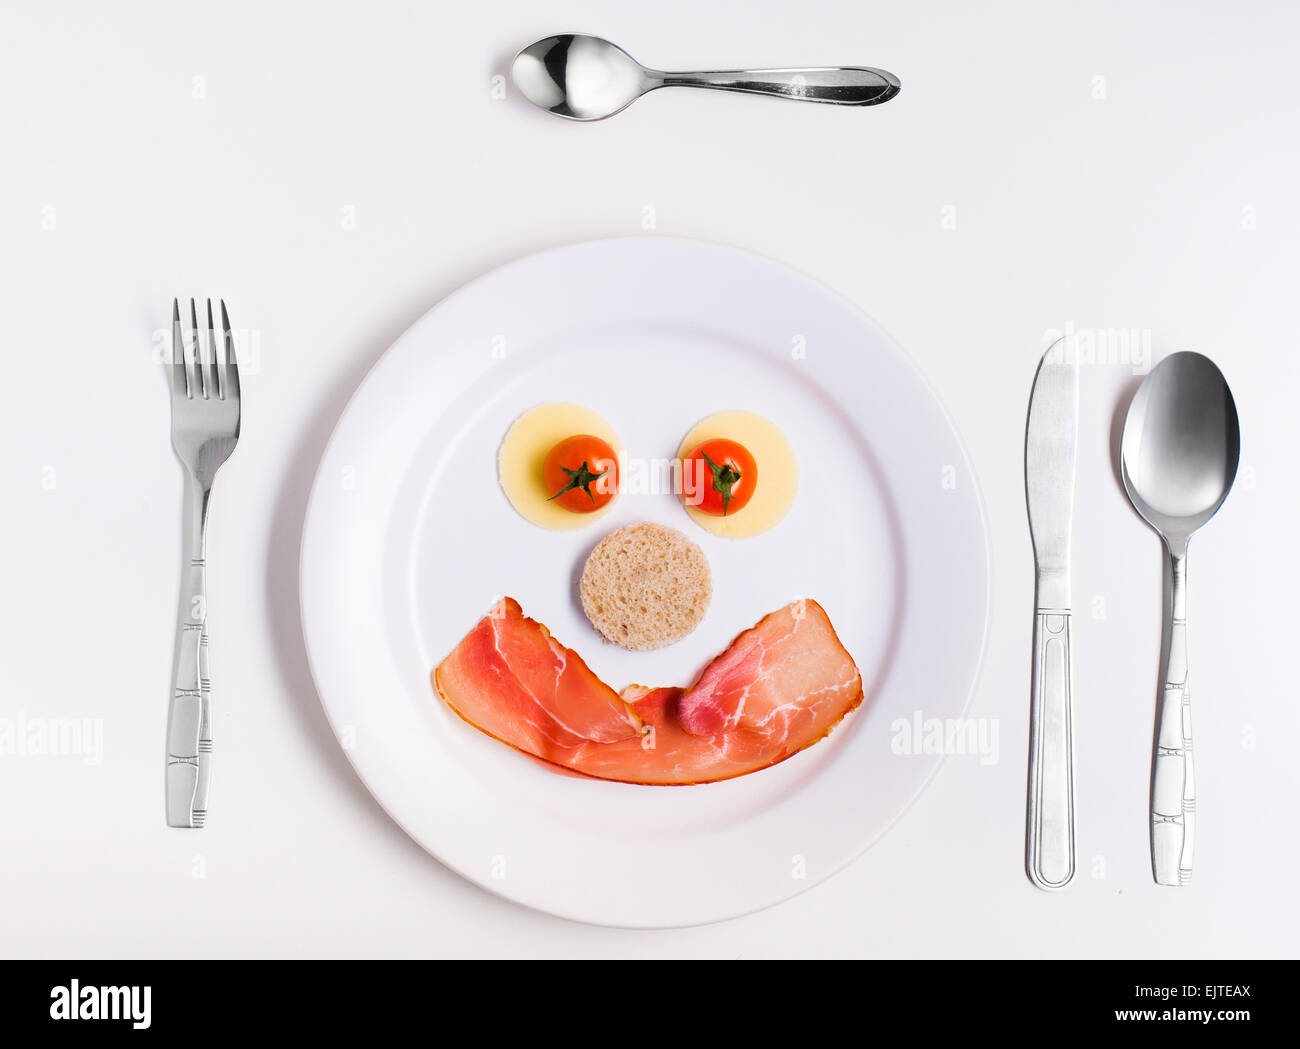 smiley face emoticon made from ham, cheese and tomatoes on a plate with cutlery Stock Photo